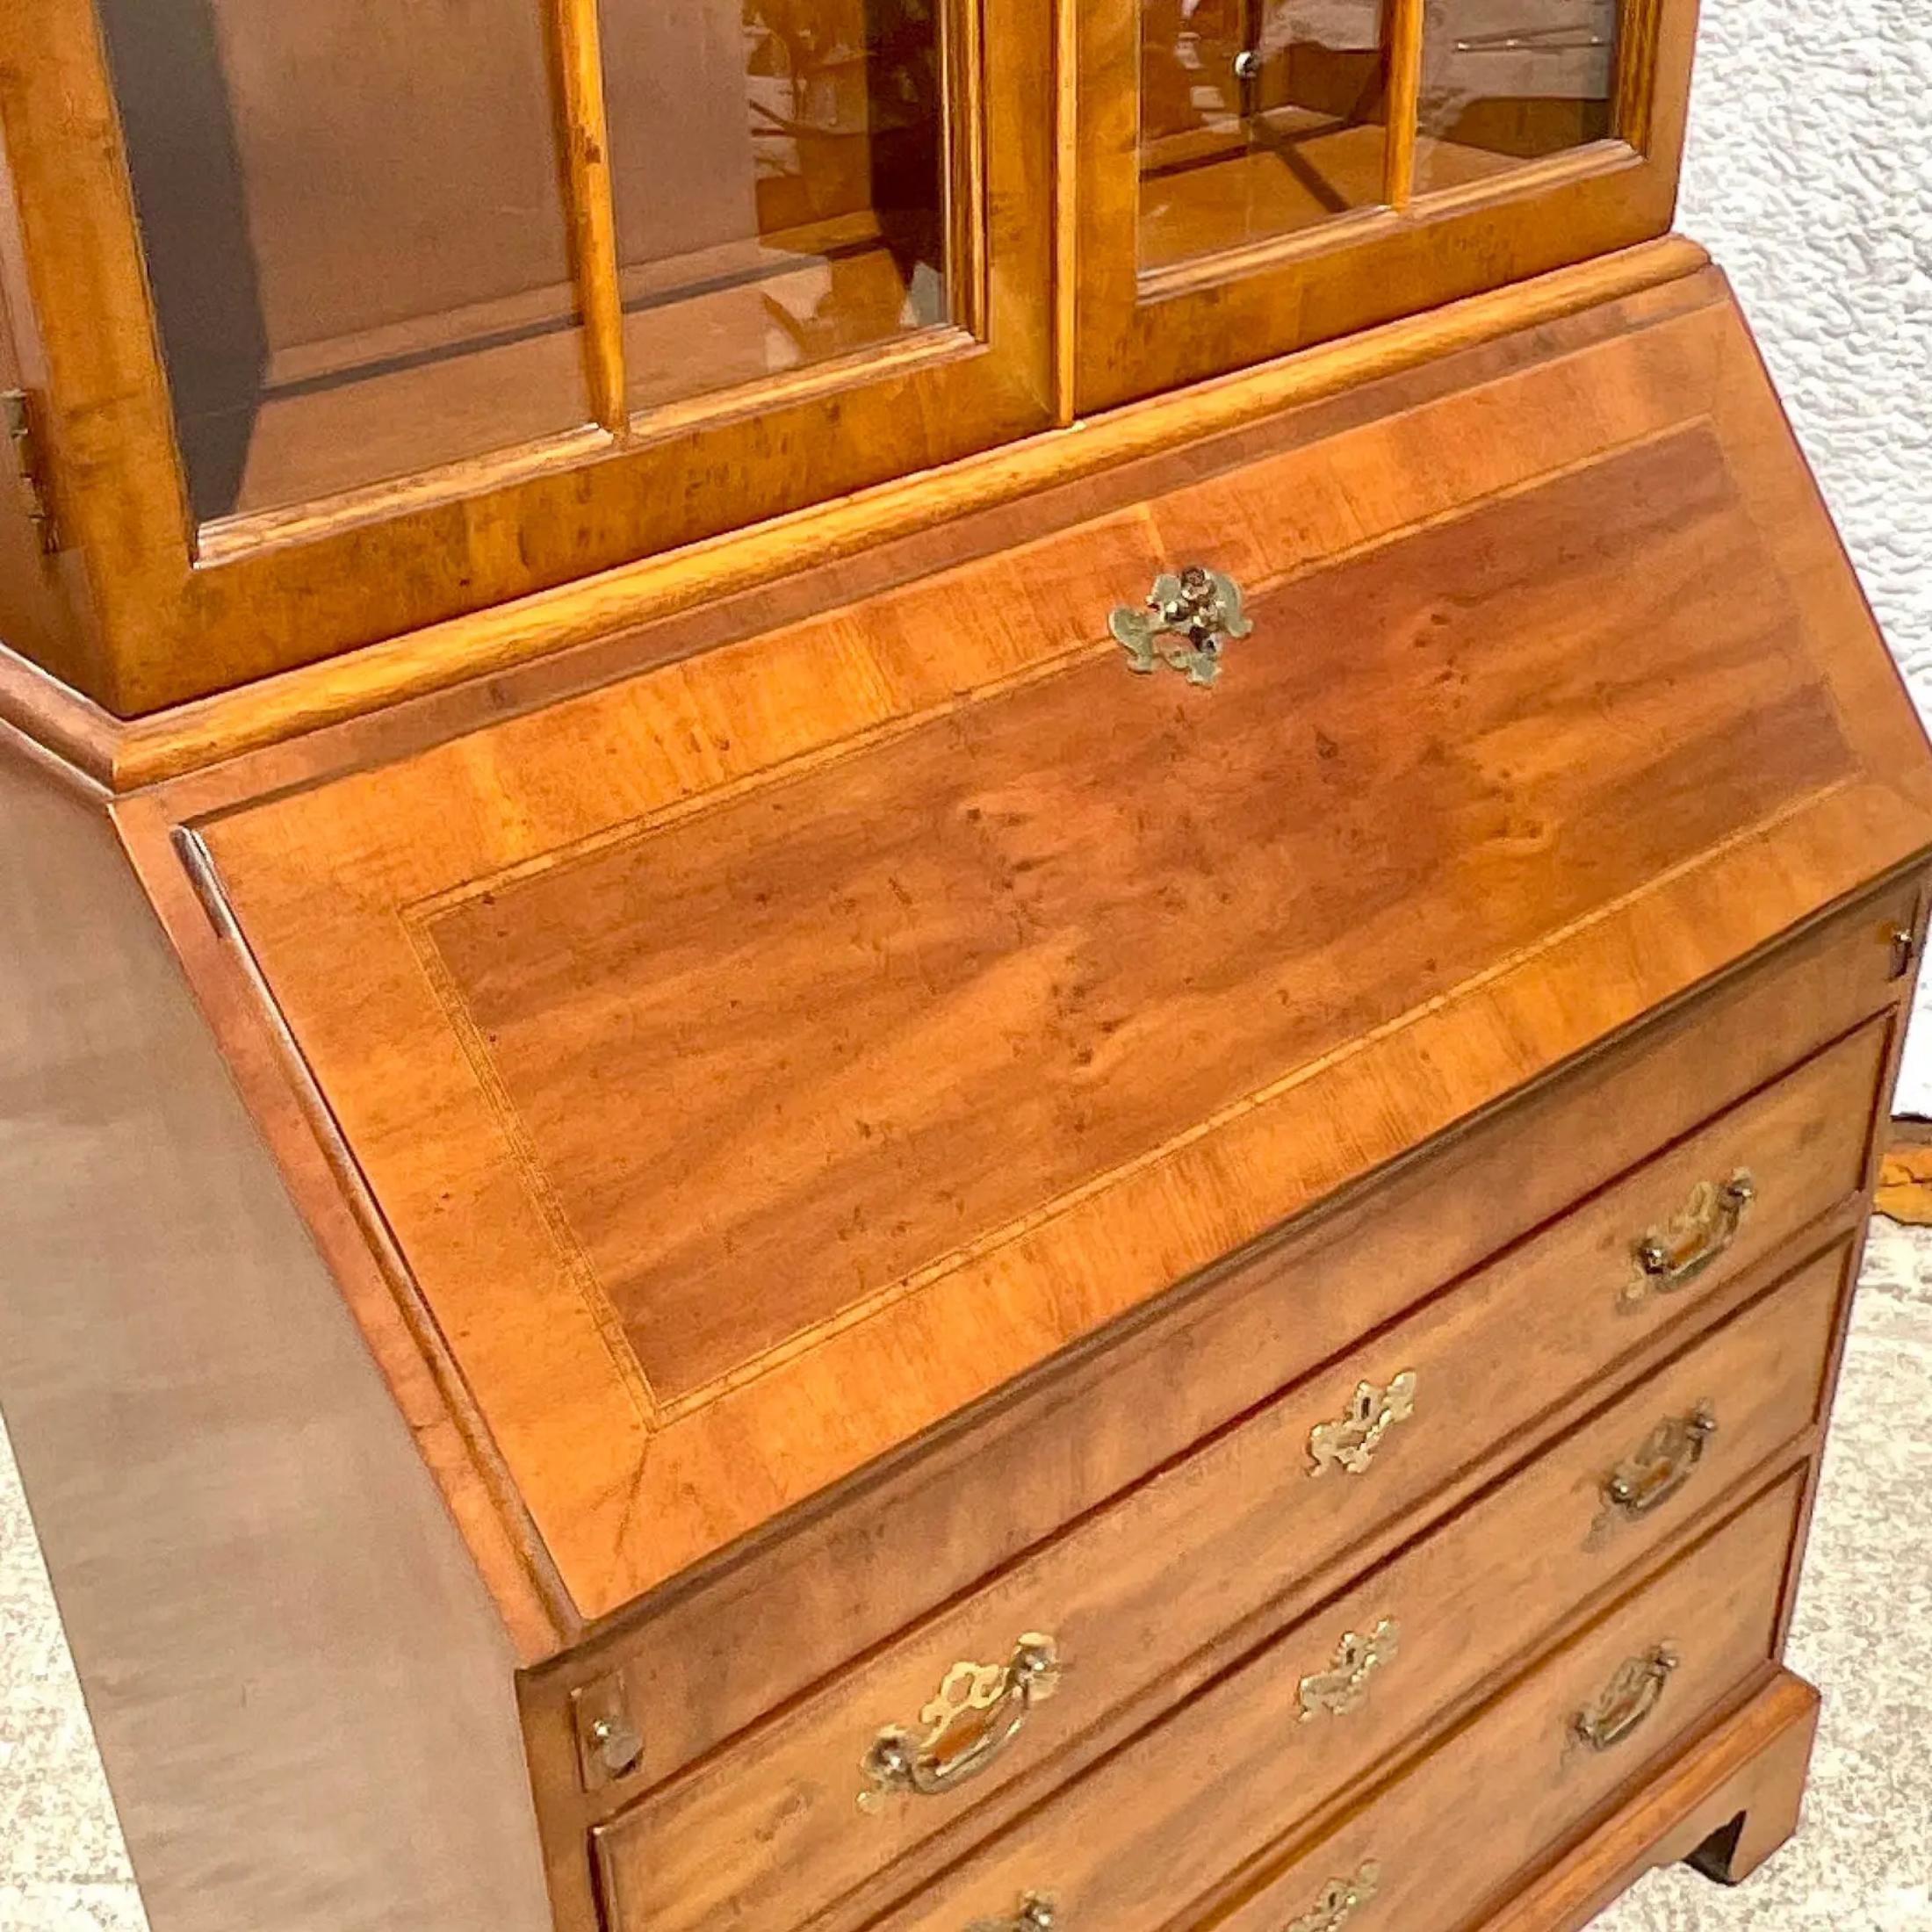 A chic vintage Boho secretary desk. Made by the iconic Henredon group. Part of their Folio 14 collection. Beautiful double arch design with beautiful wood grain detail. Acquired from a Palm Beach estate